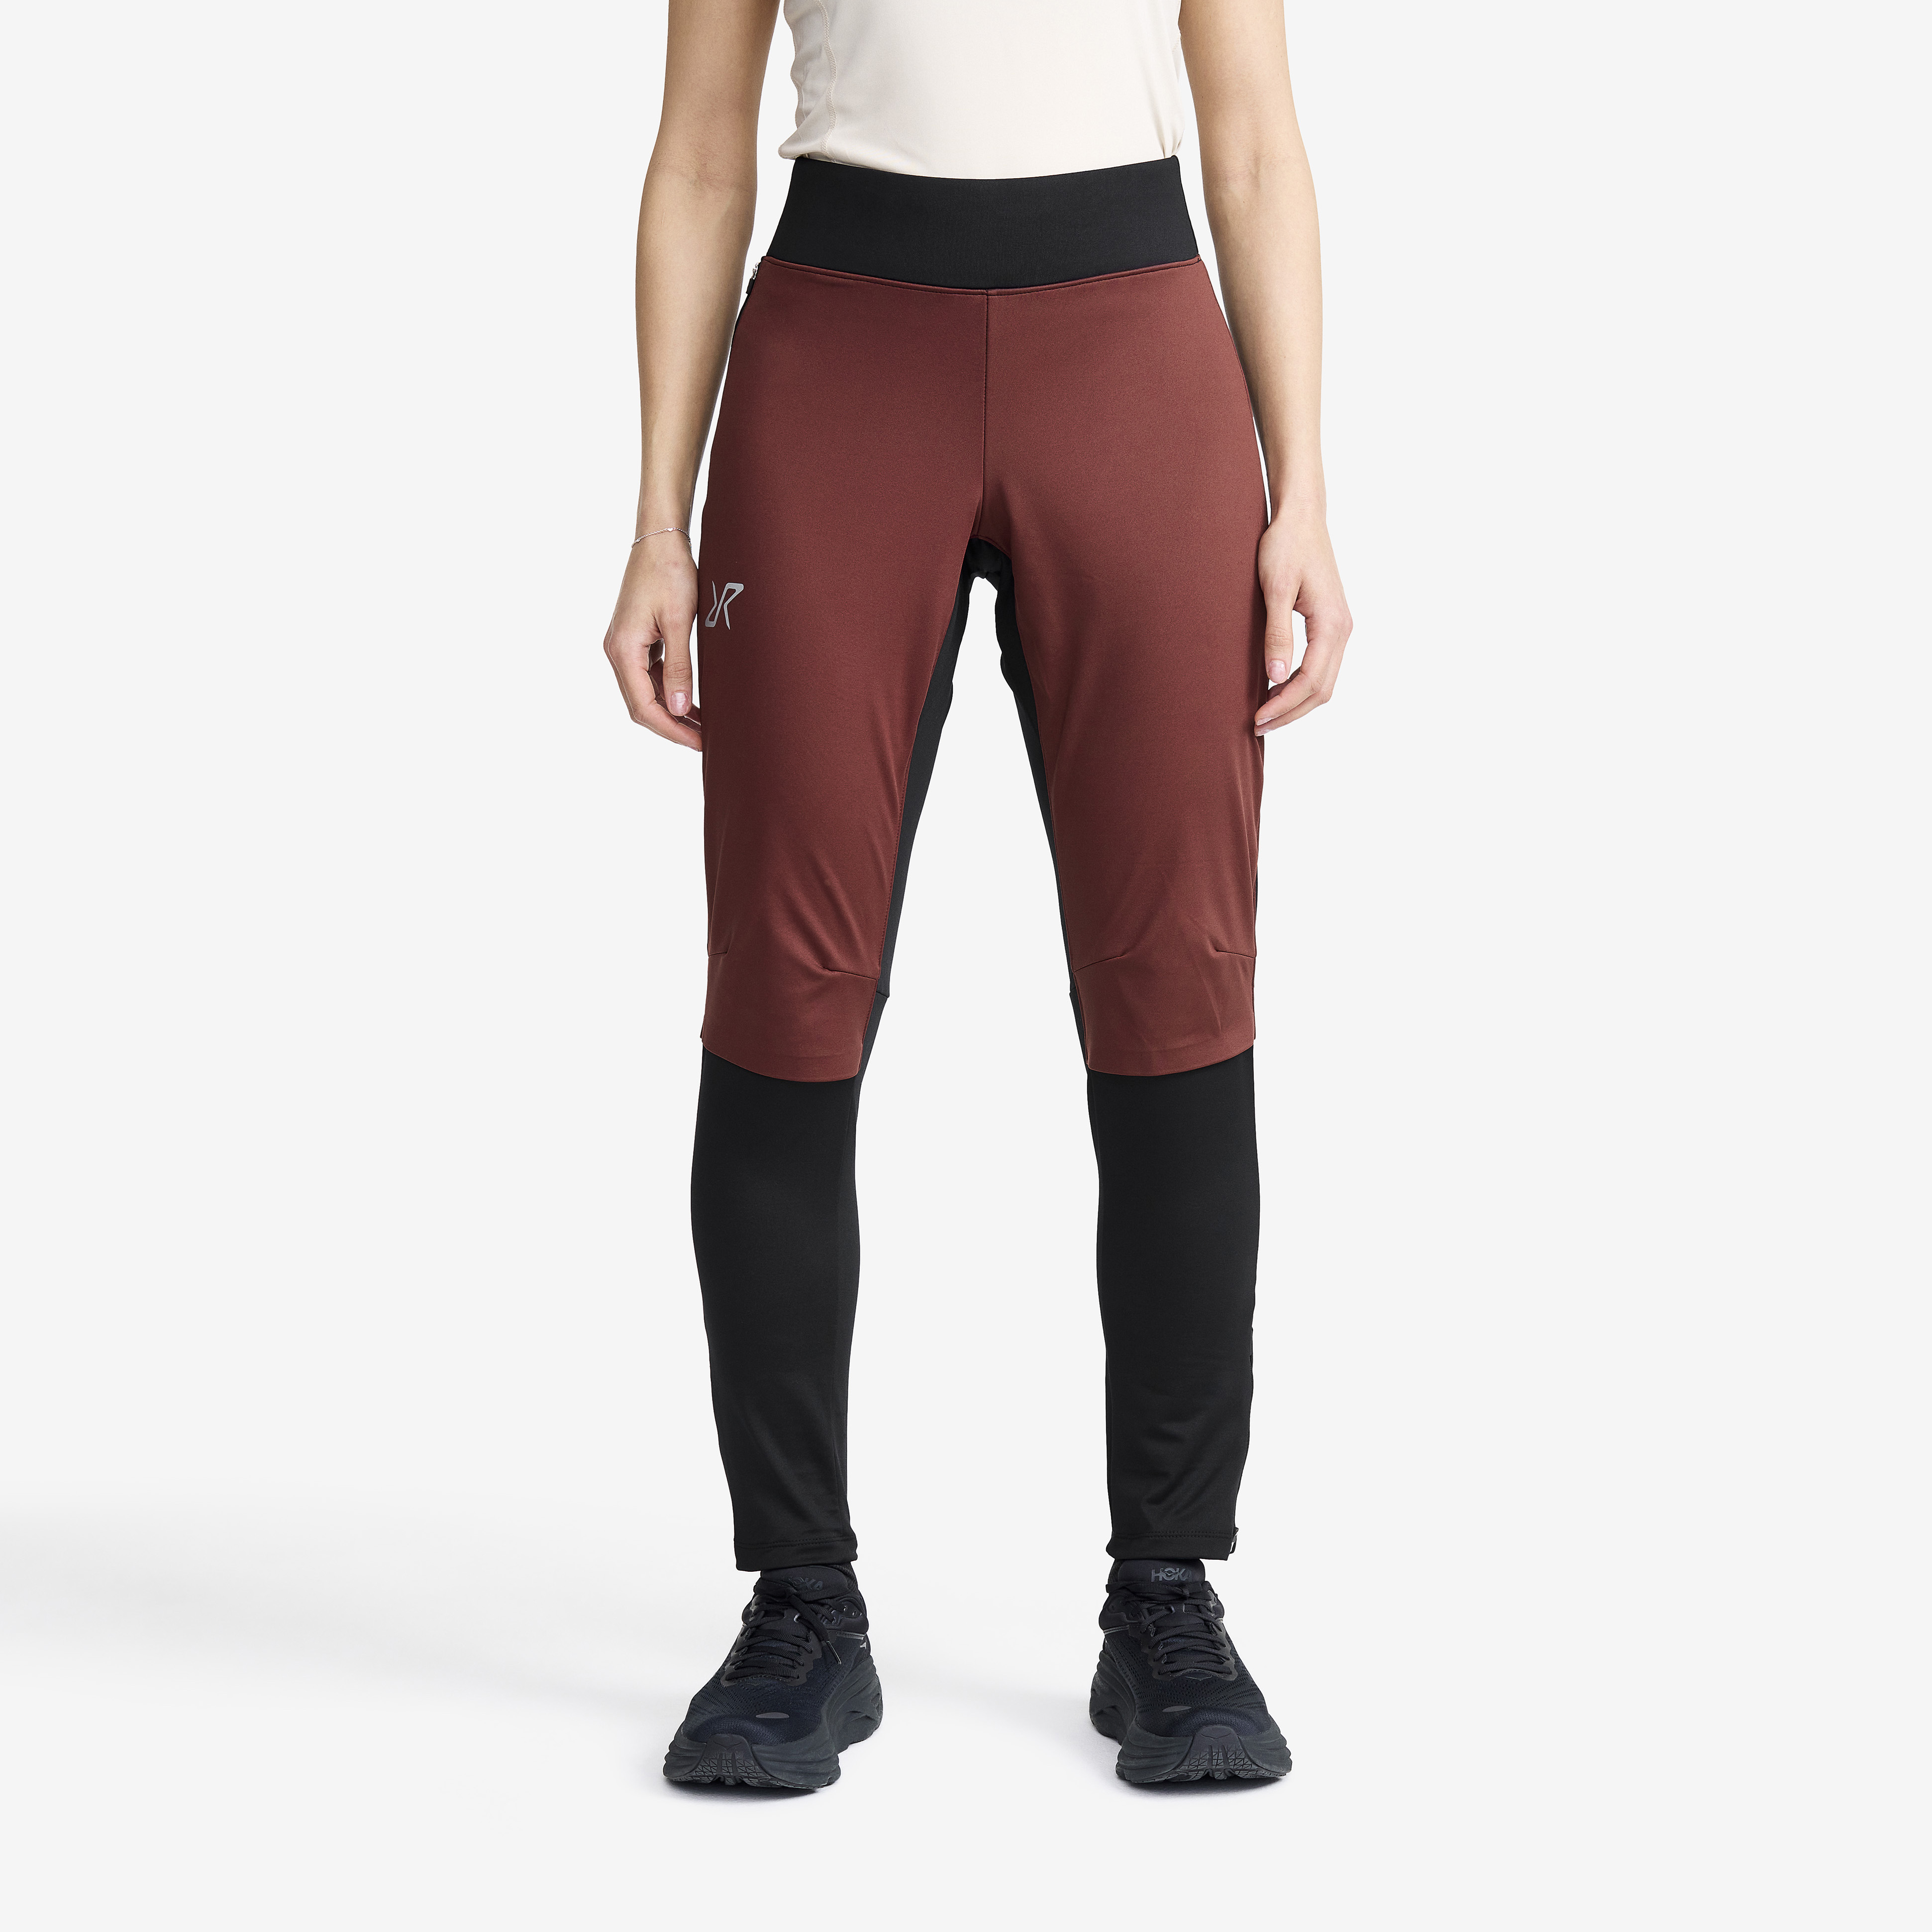 Pace Wind Tights – Dam – Andorra Storlek:XS – Outdoor Tights